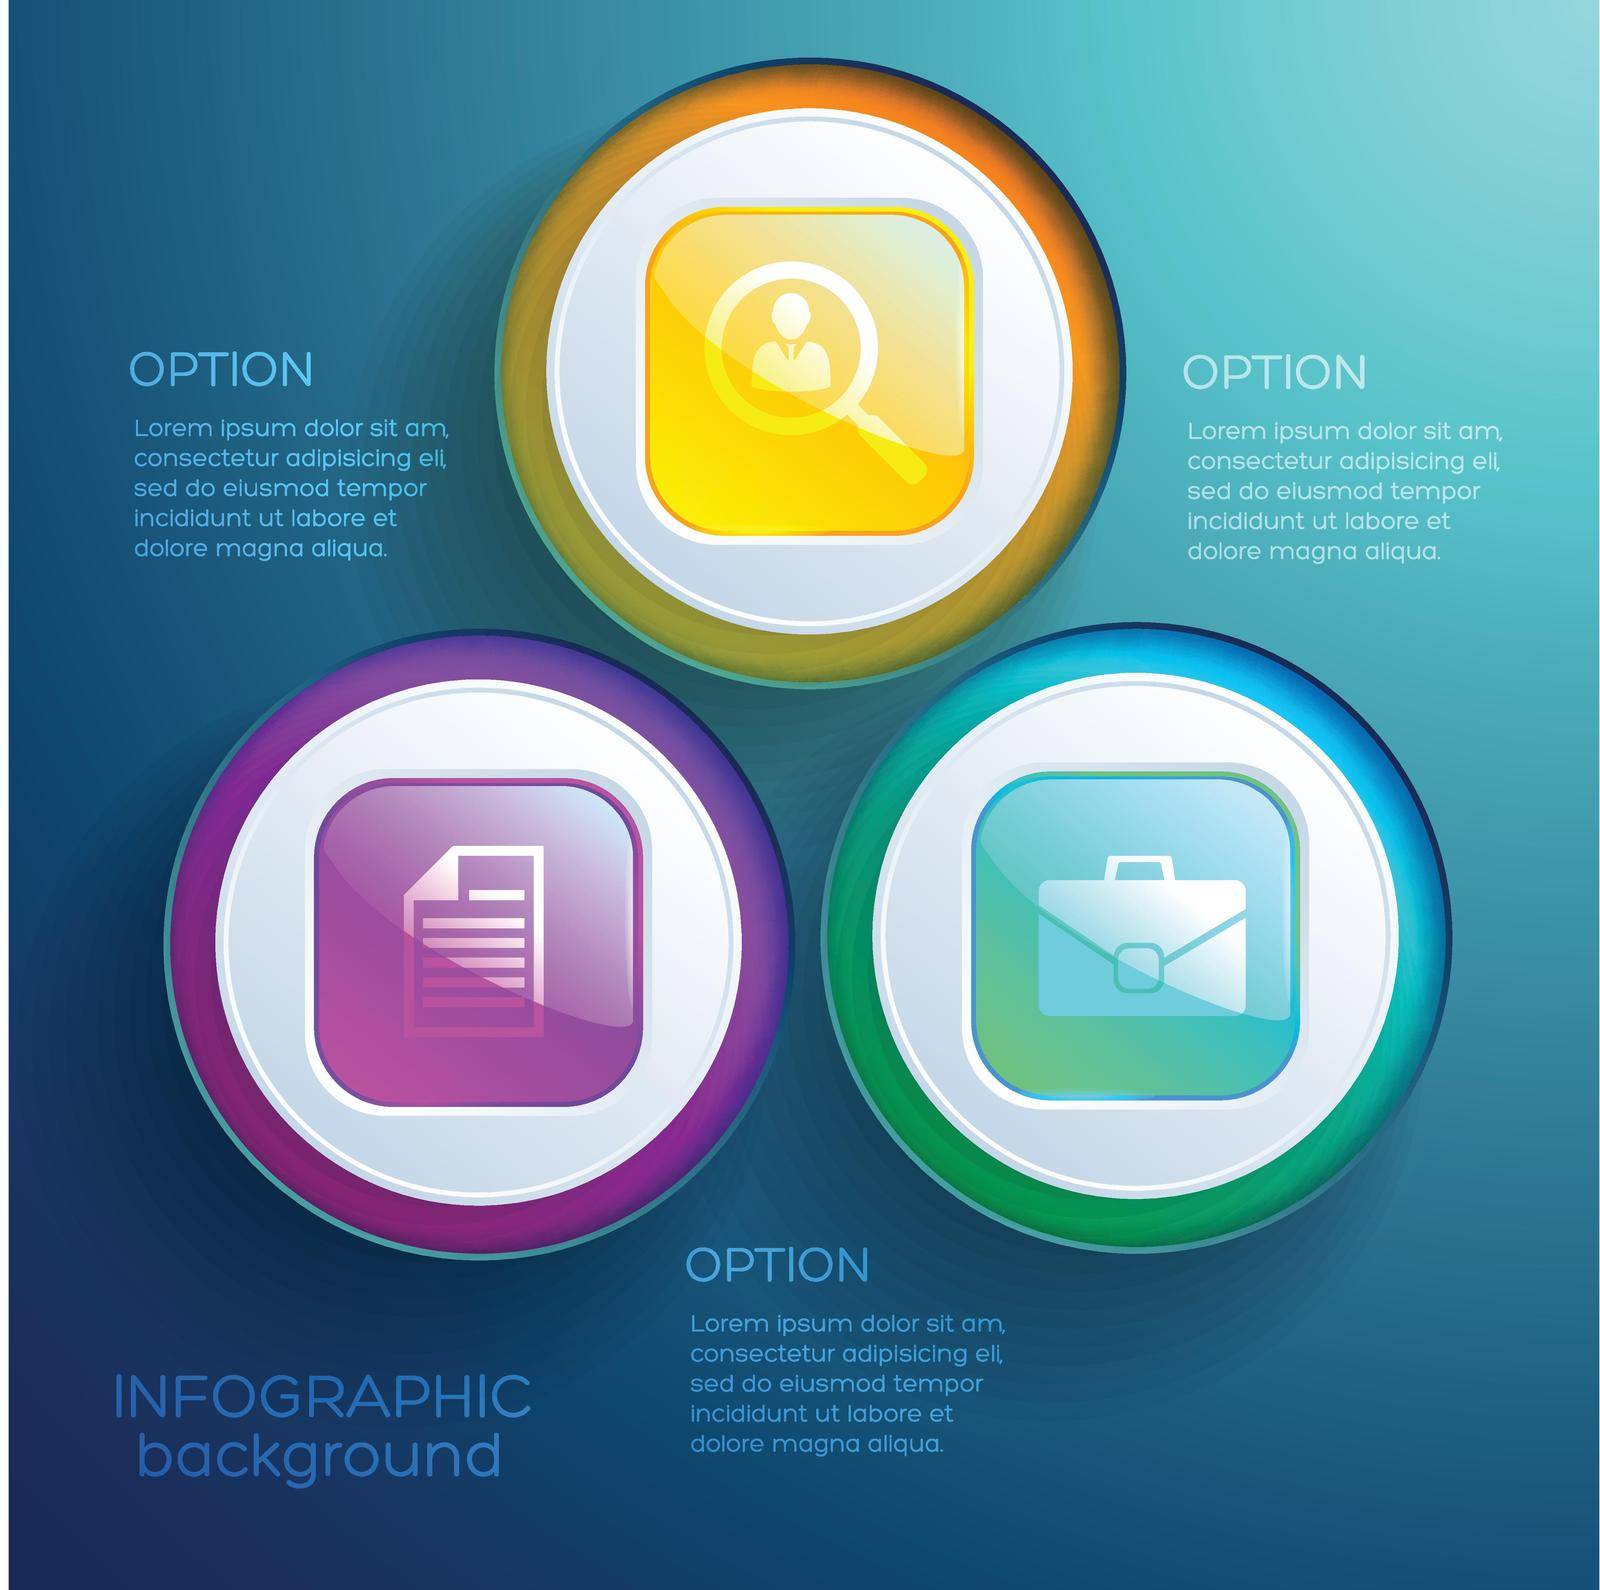 Business infographic web design concept with three options colorful glossy buttons and icons isolated vector illustration